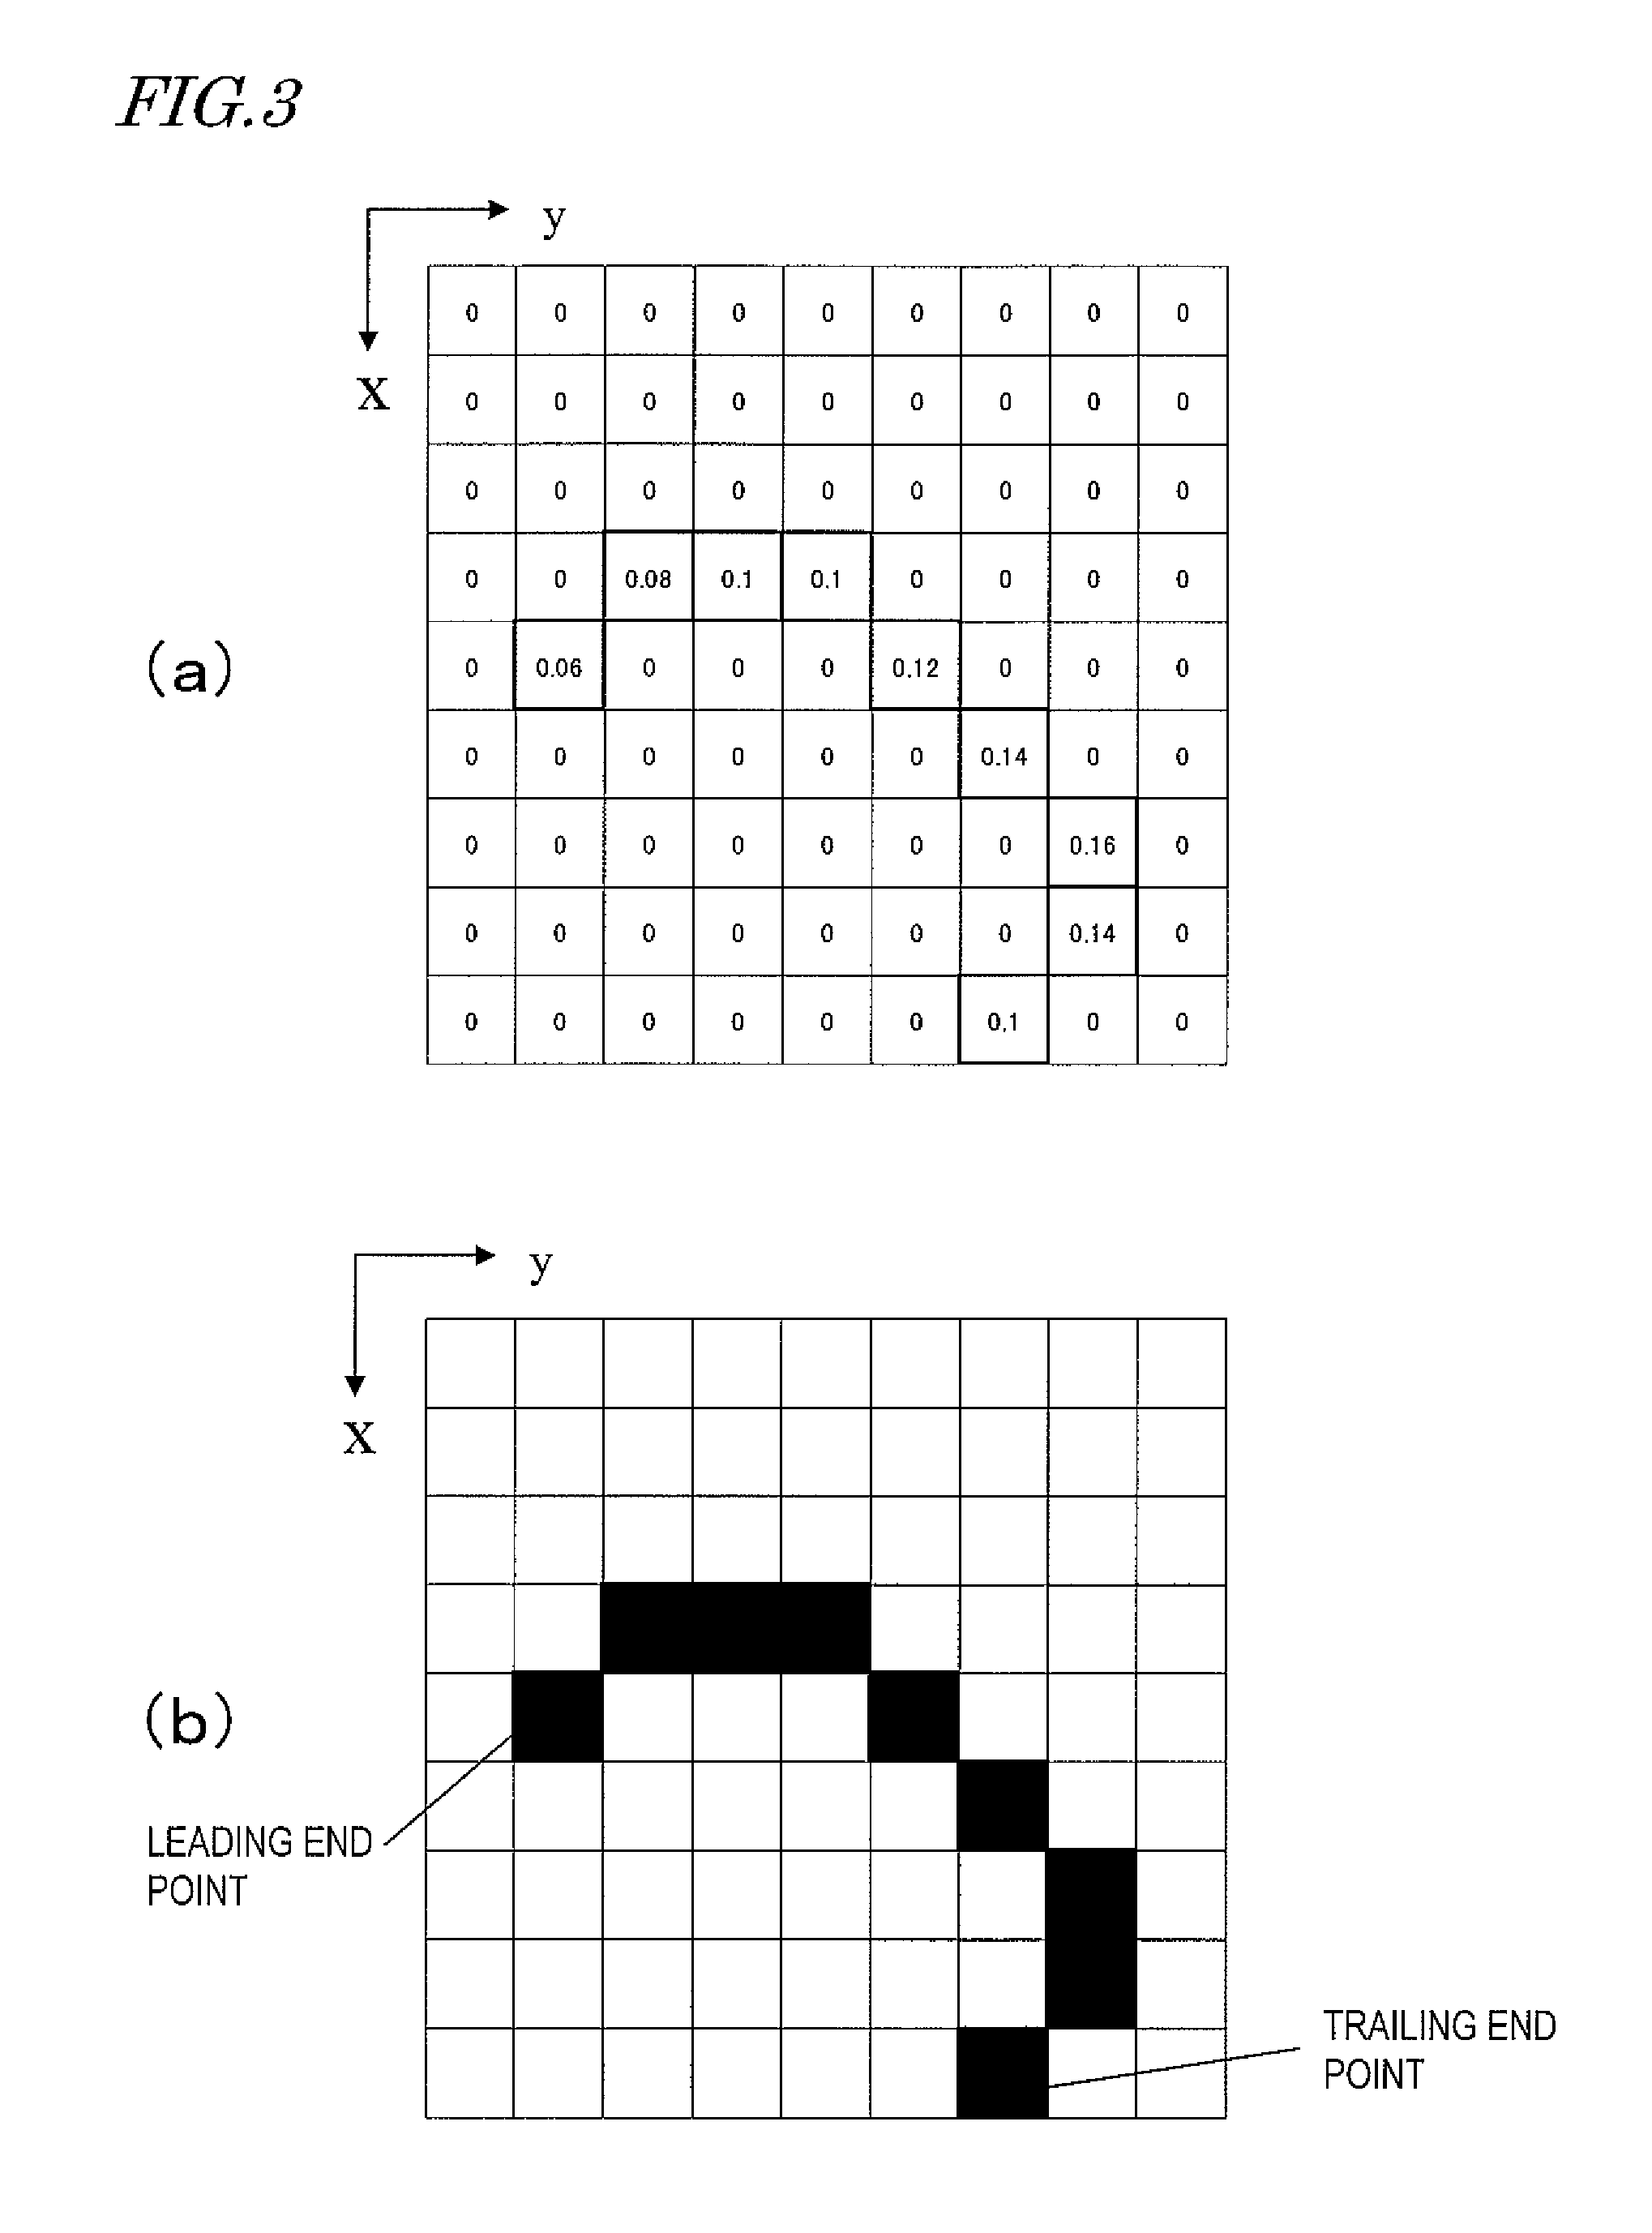 Reducing blur based on a kernel estimation of an imaging device